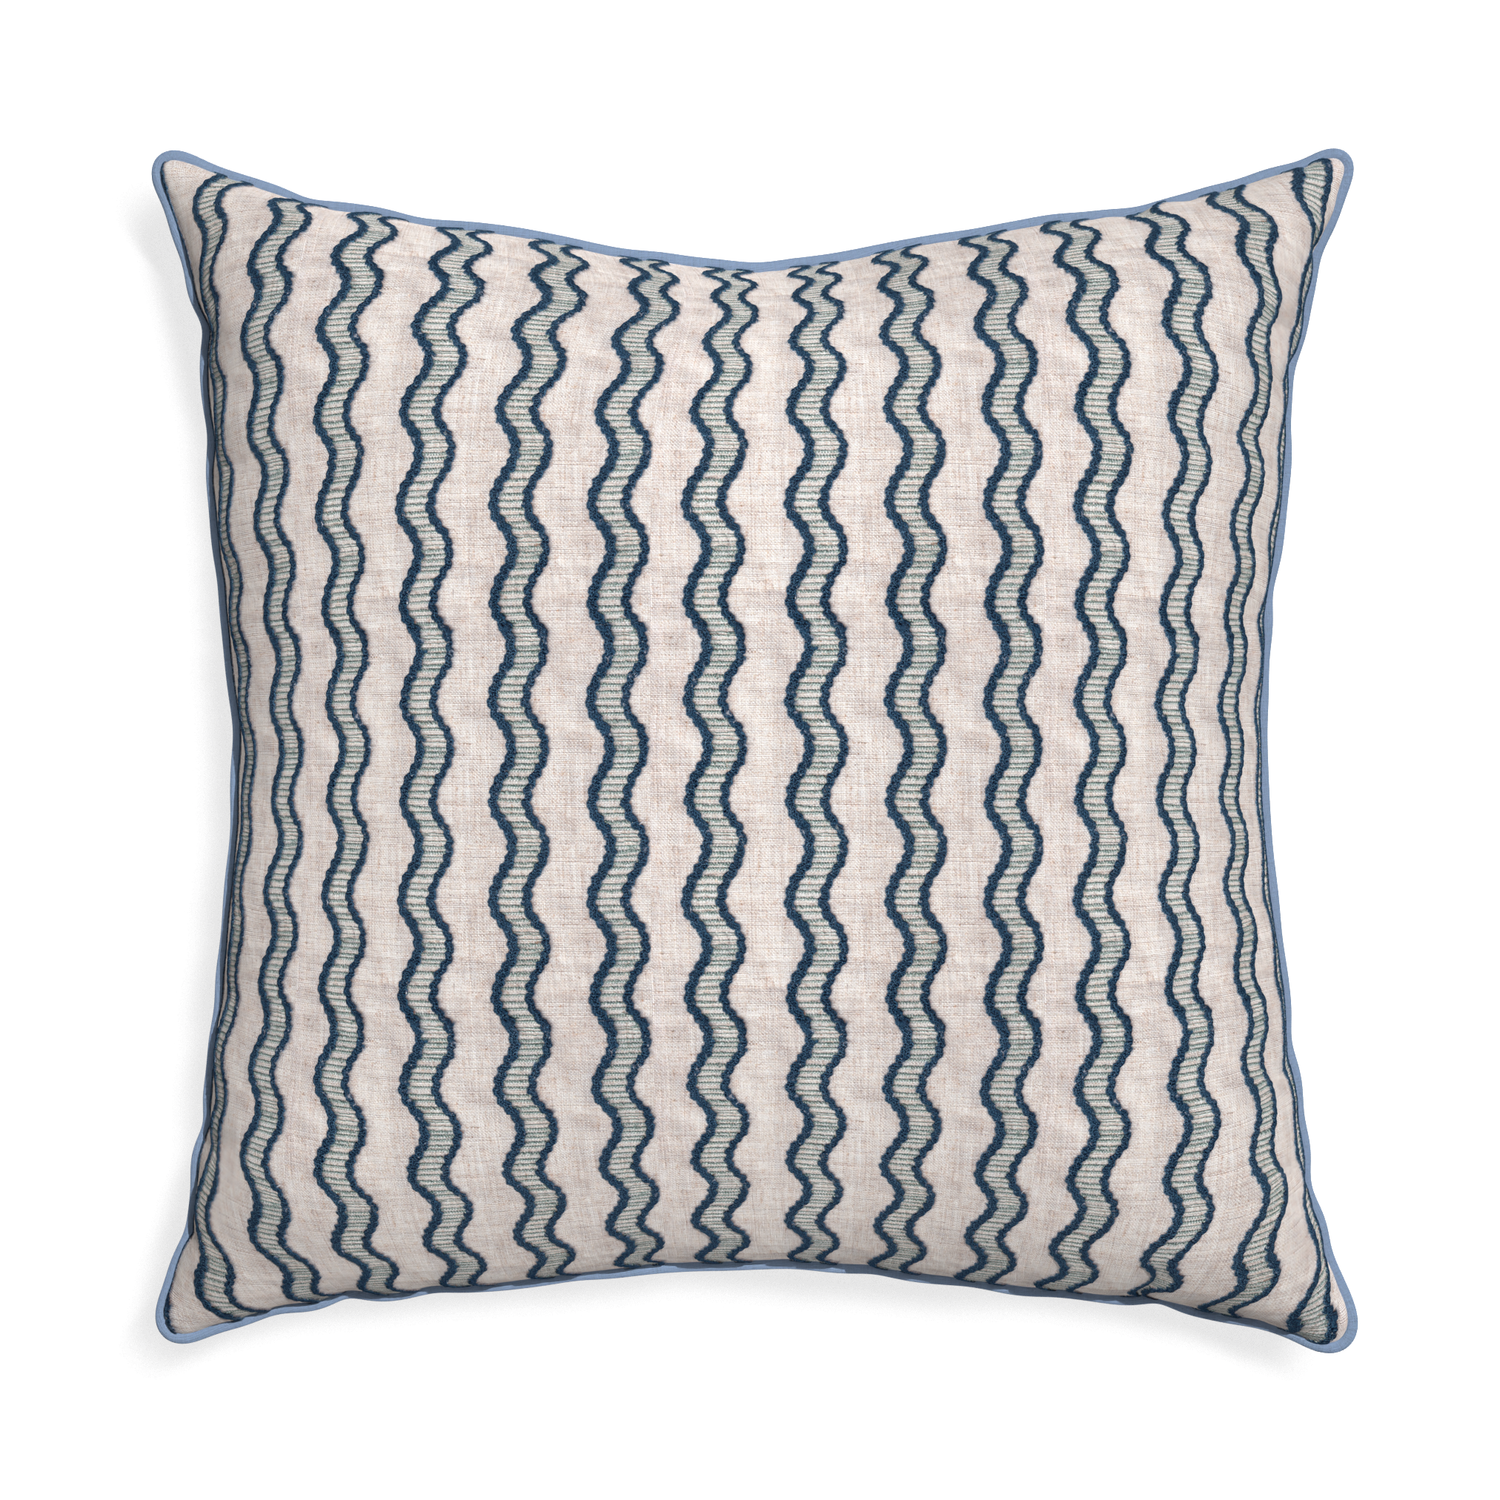 Euro-sham beatrice custom embroidered wavepillow with sky piping on white background